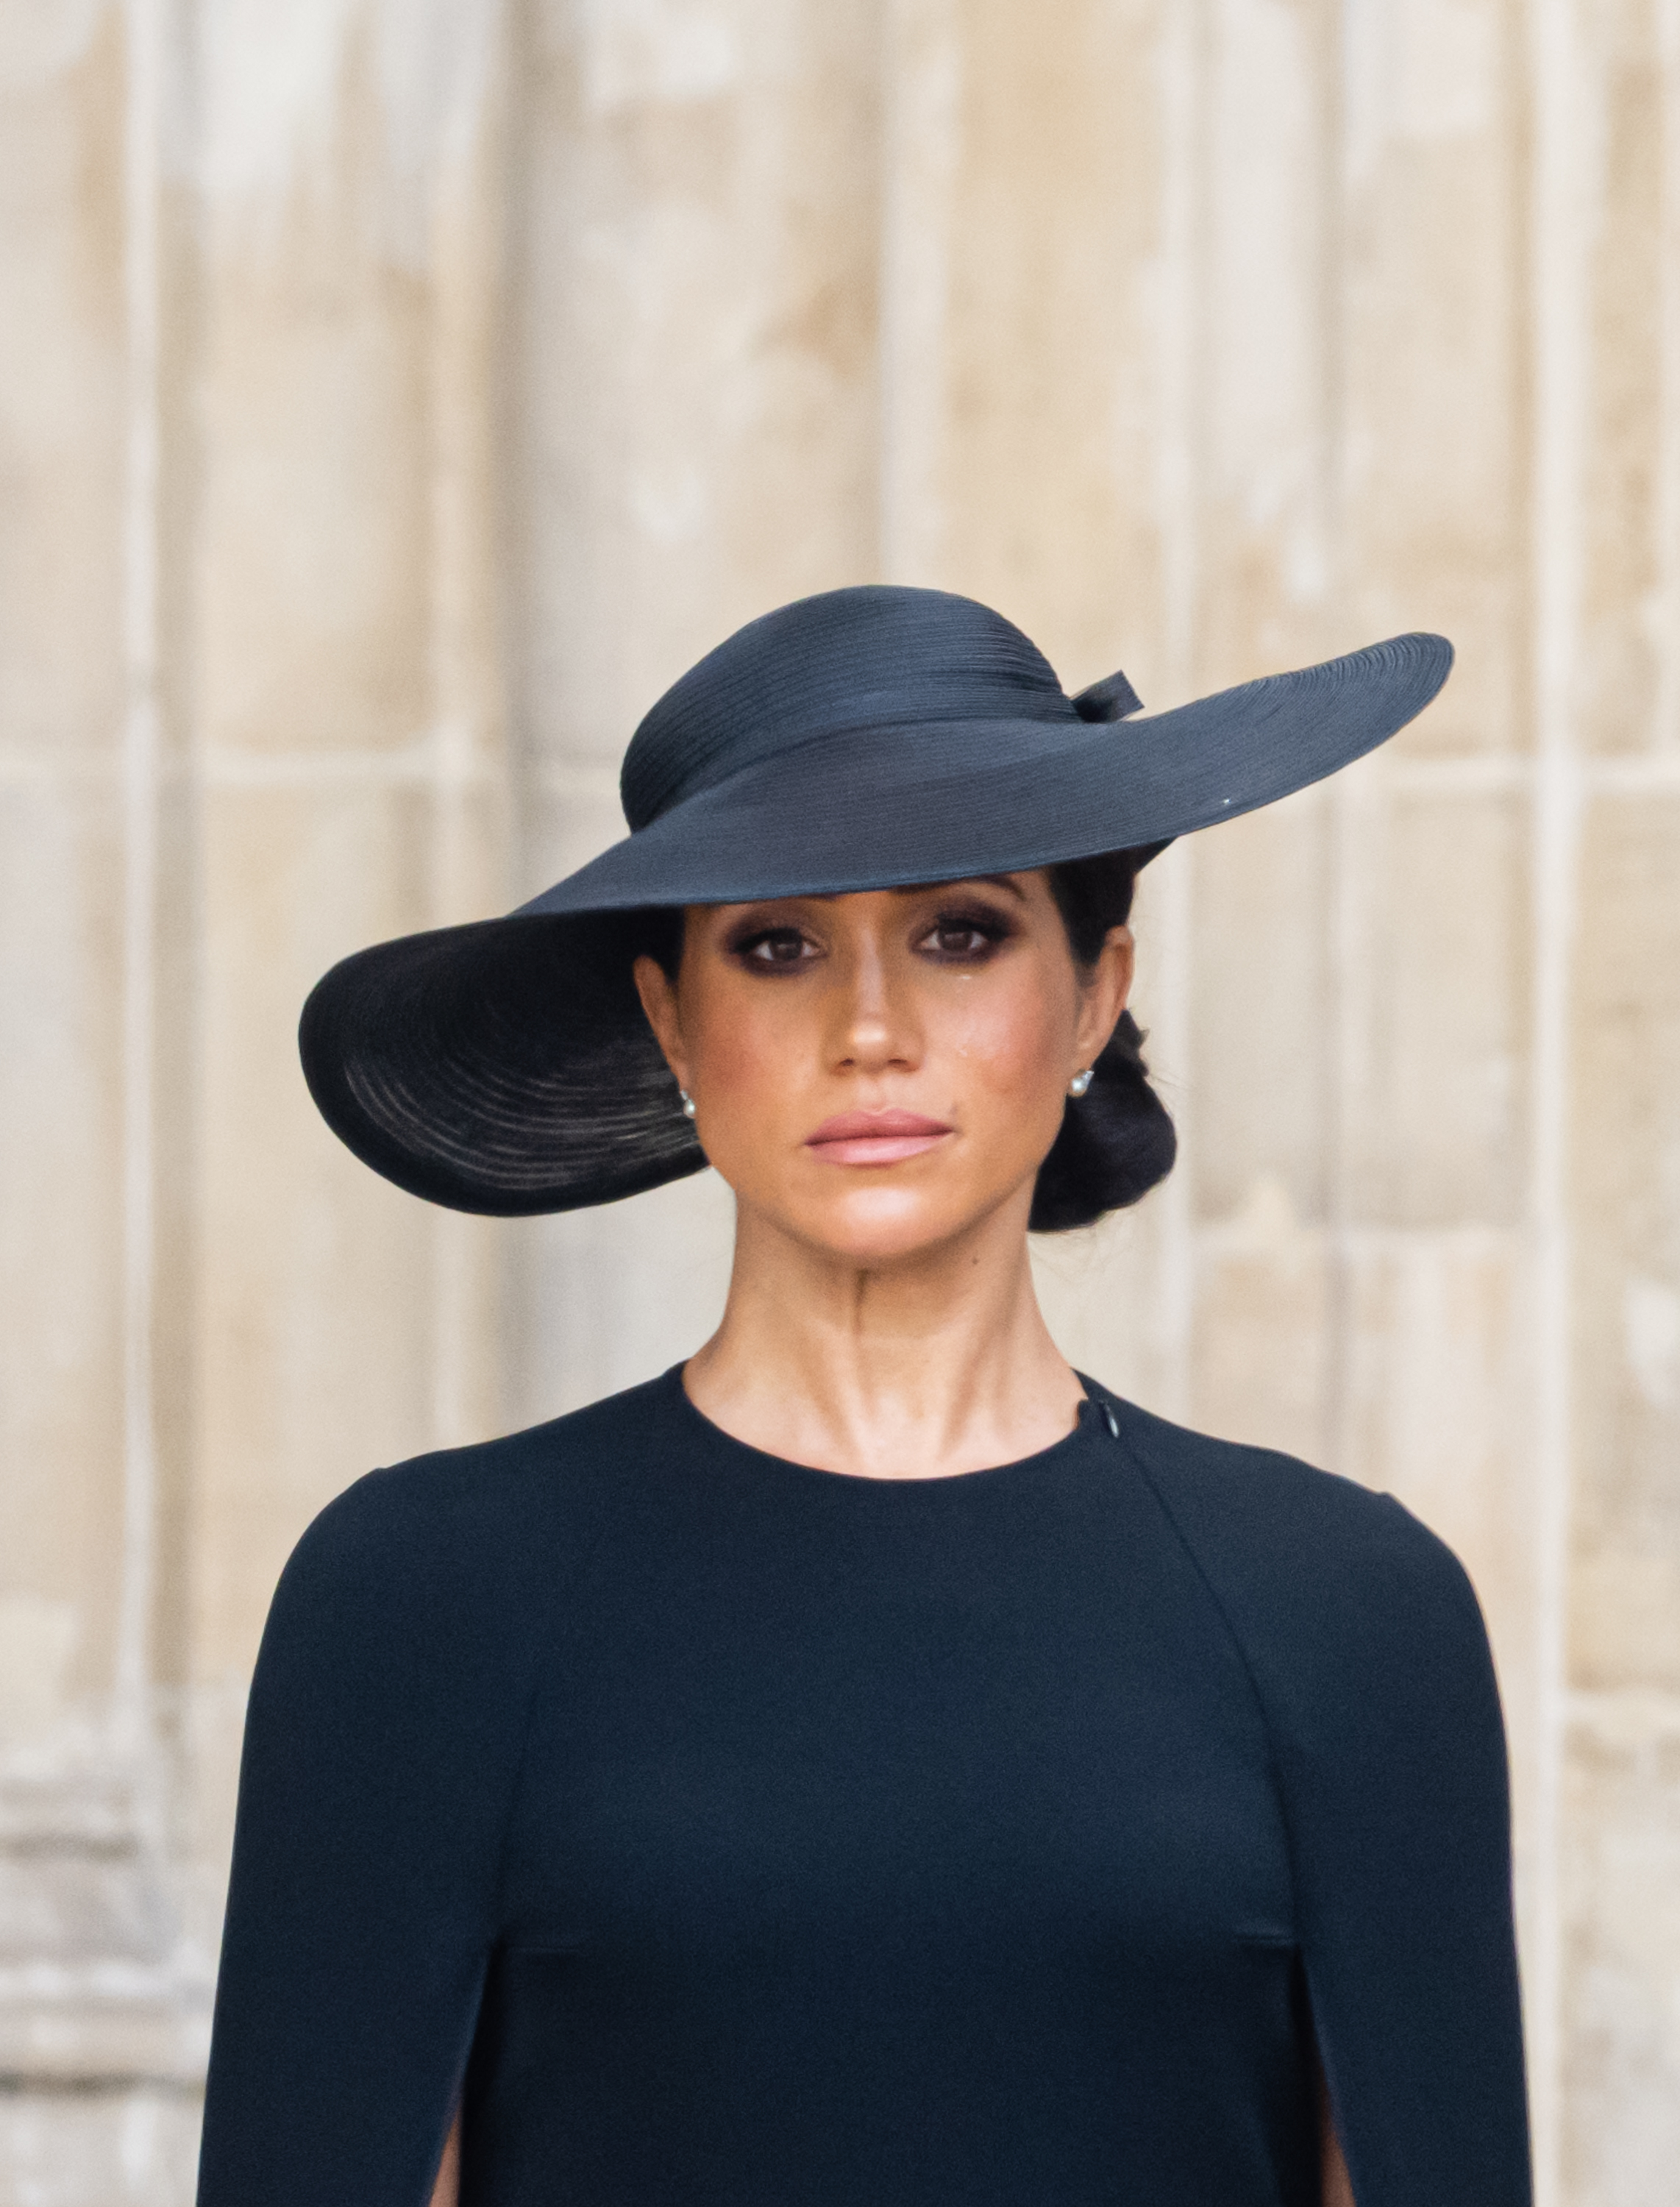 Meghan Markle during The State Funeral of Queen Elizabeth II on September 19, 2022 in London, England | Source: Getty Images